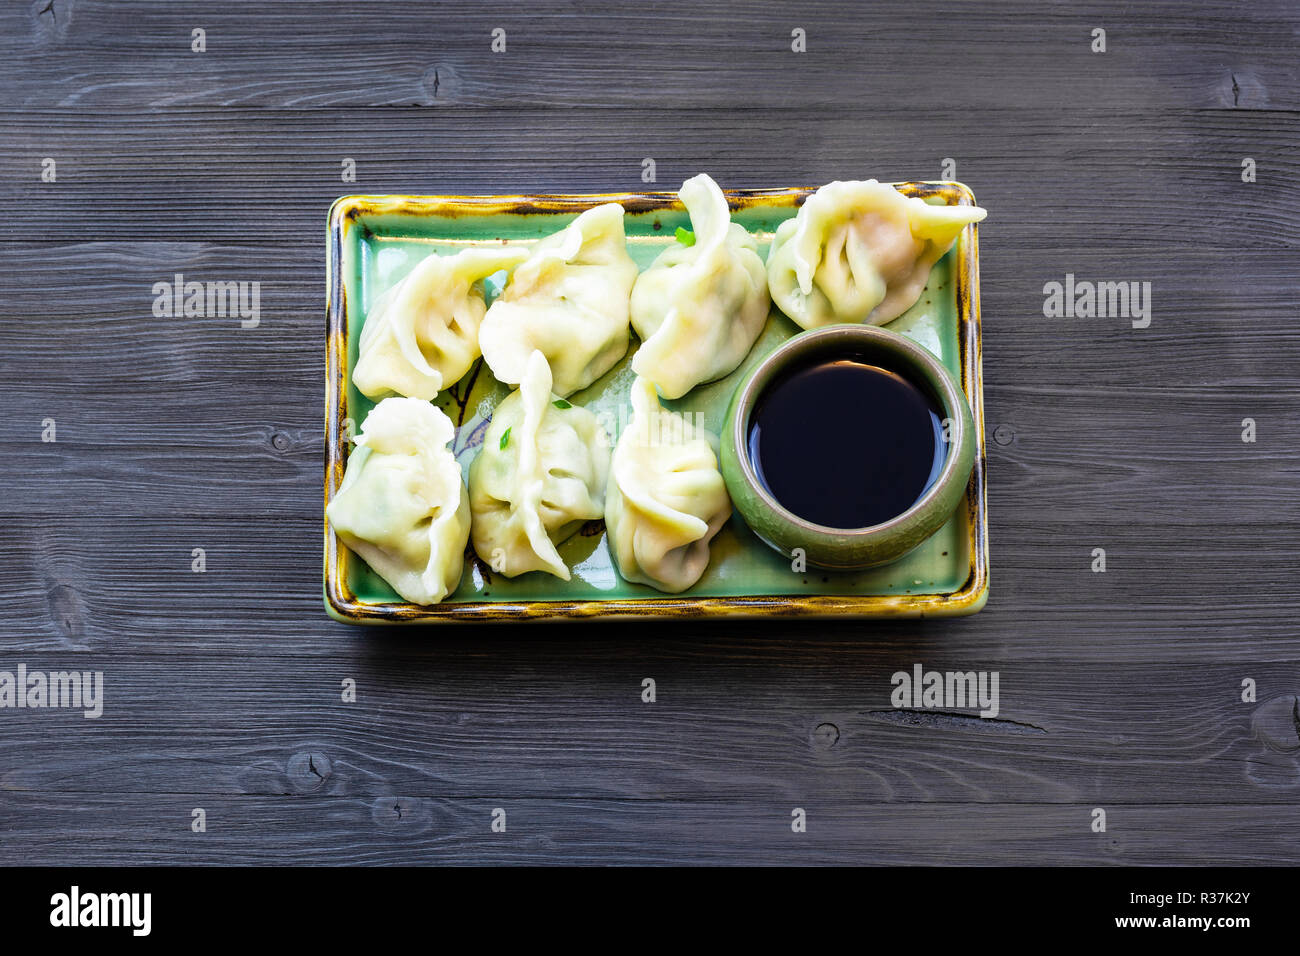 Chinese cuisine dish - top view of served portion of Dumplings with three fillings (shrimp, egg and greens) on green plate on dark wooden board Stock Photo